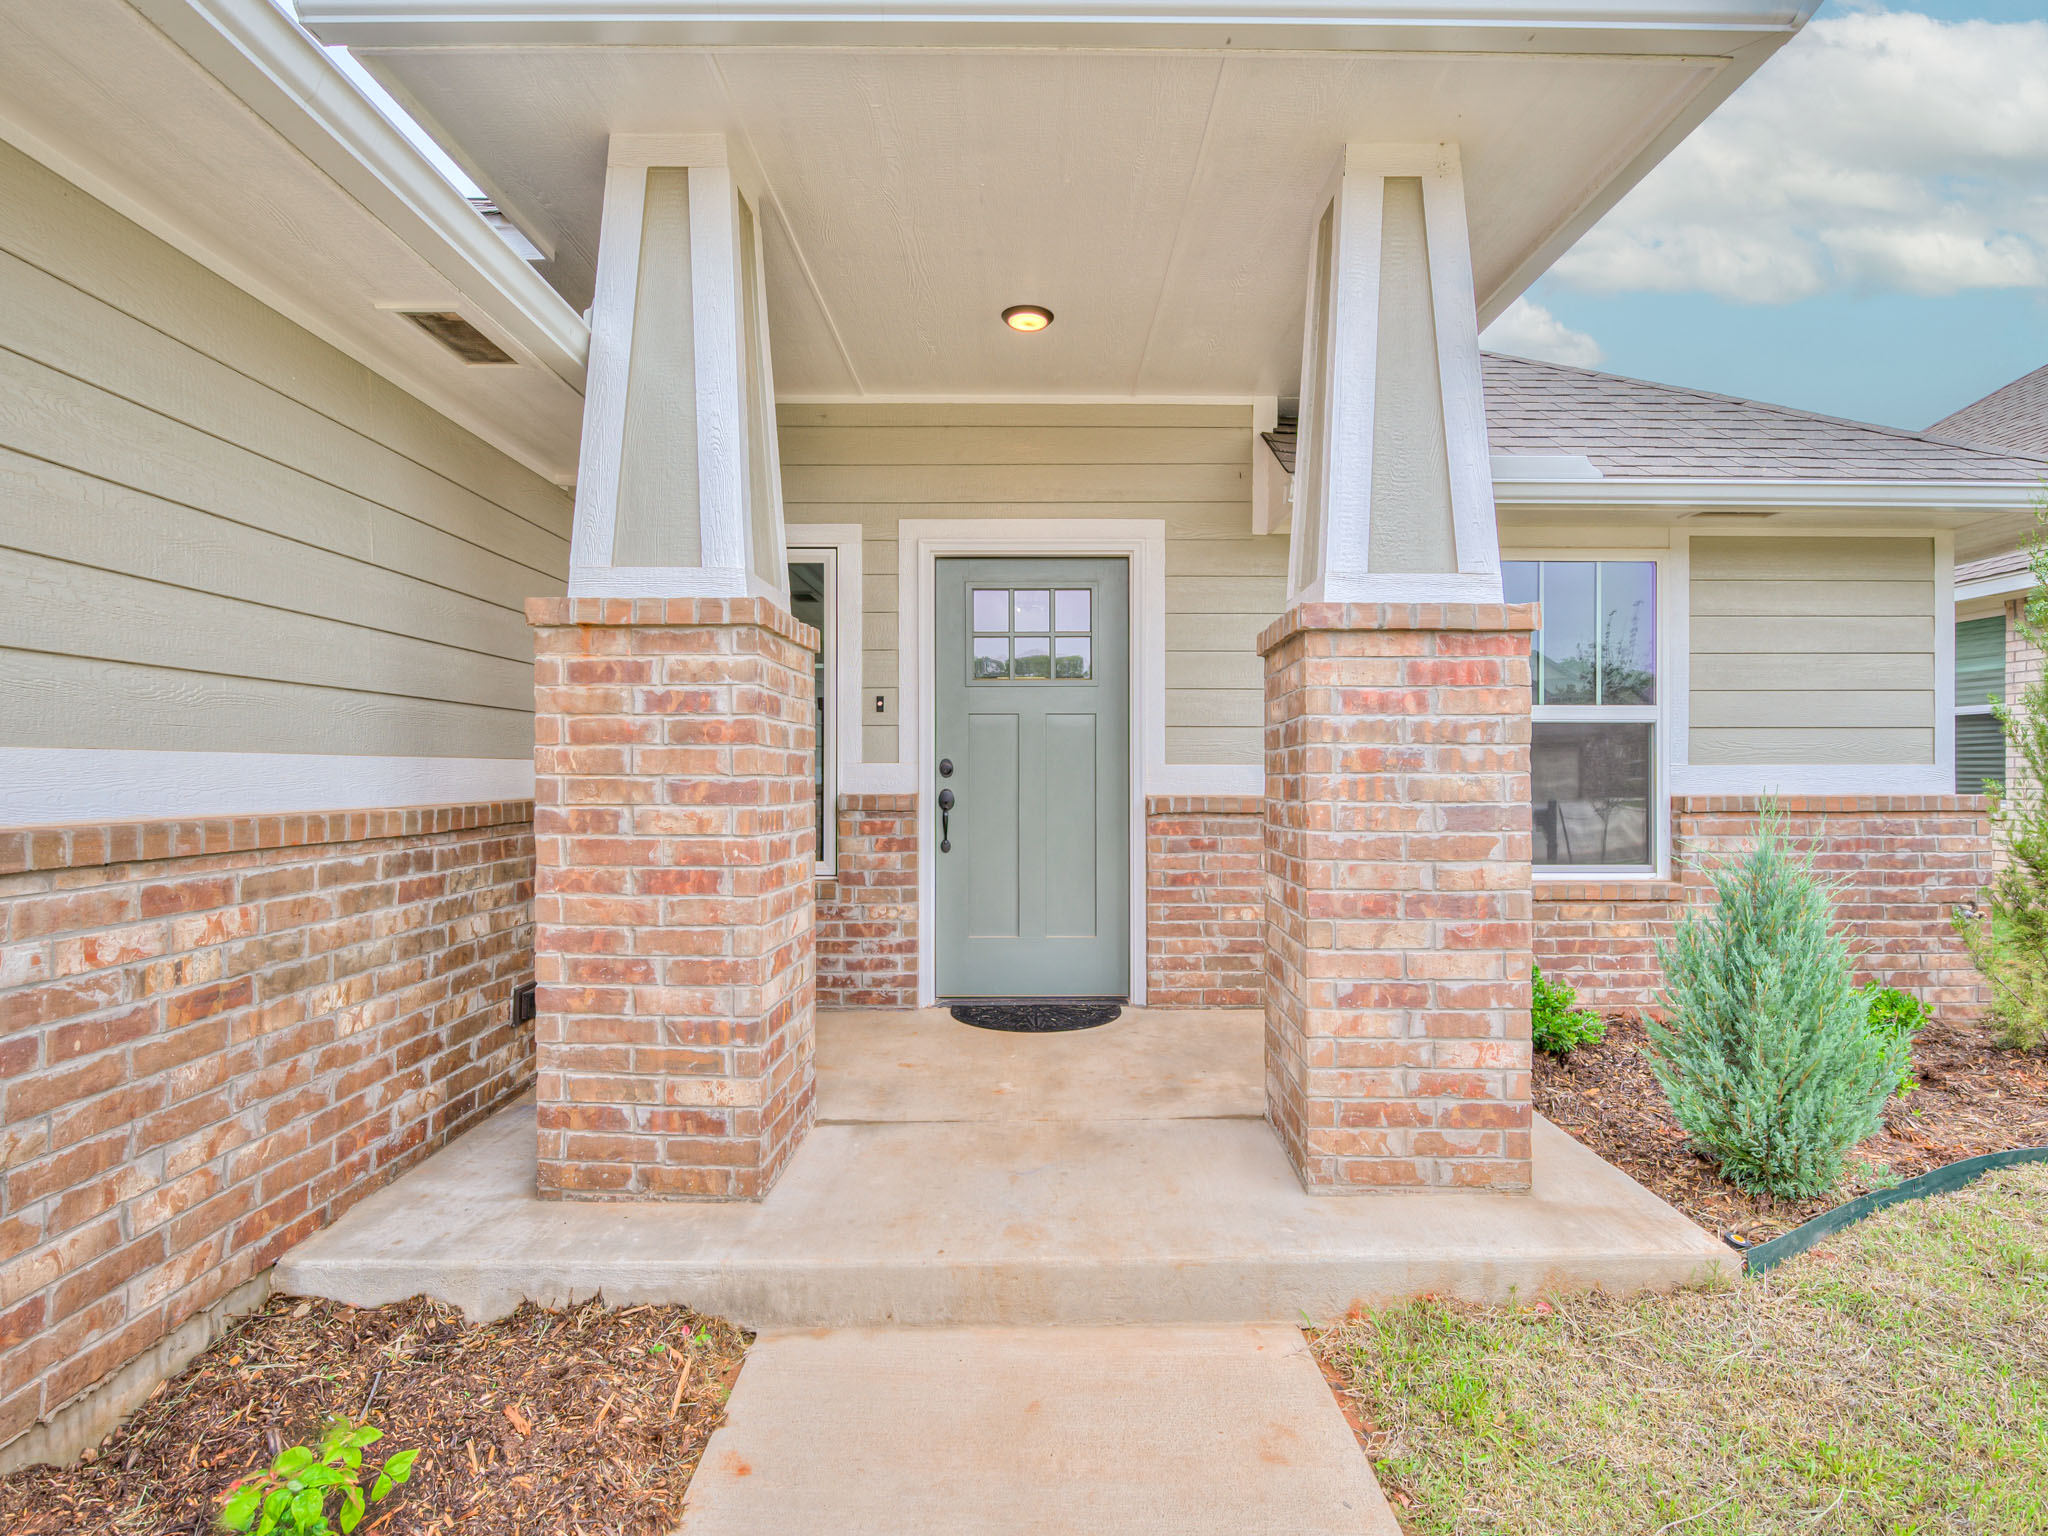 2421 Creekview Trail, Moore, Oklahoma 73160, 4 Bedrooms Bedrooms, ,2 BathroomsBathrooms,House,For Sale,Creekview Trail,1460